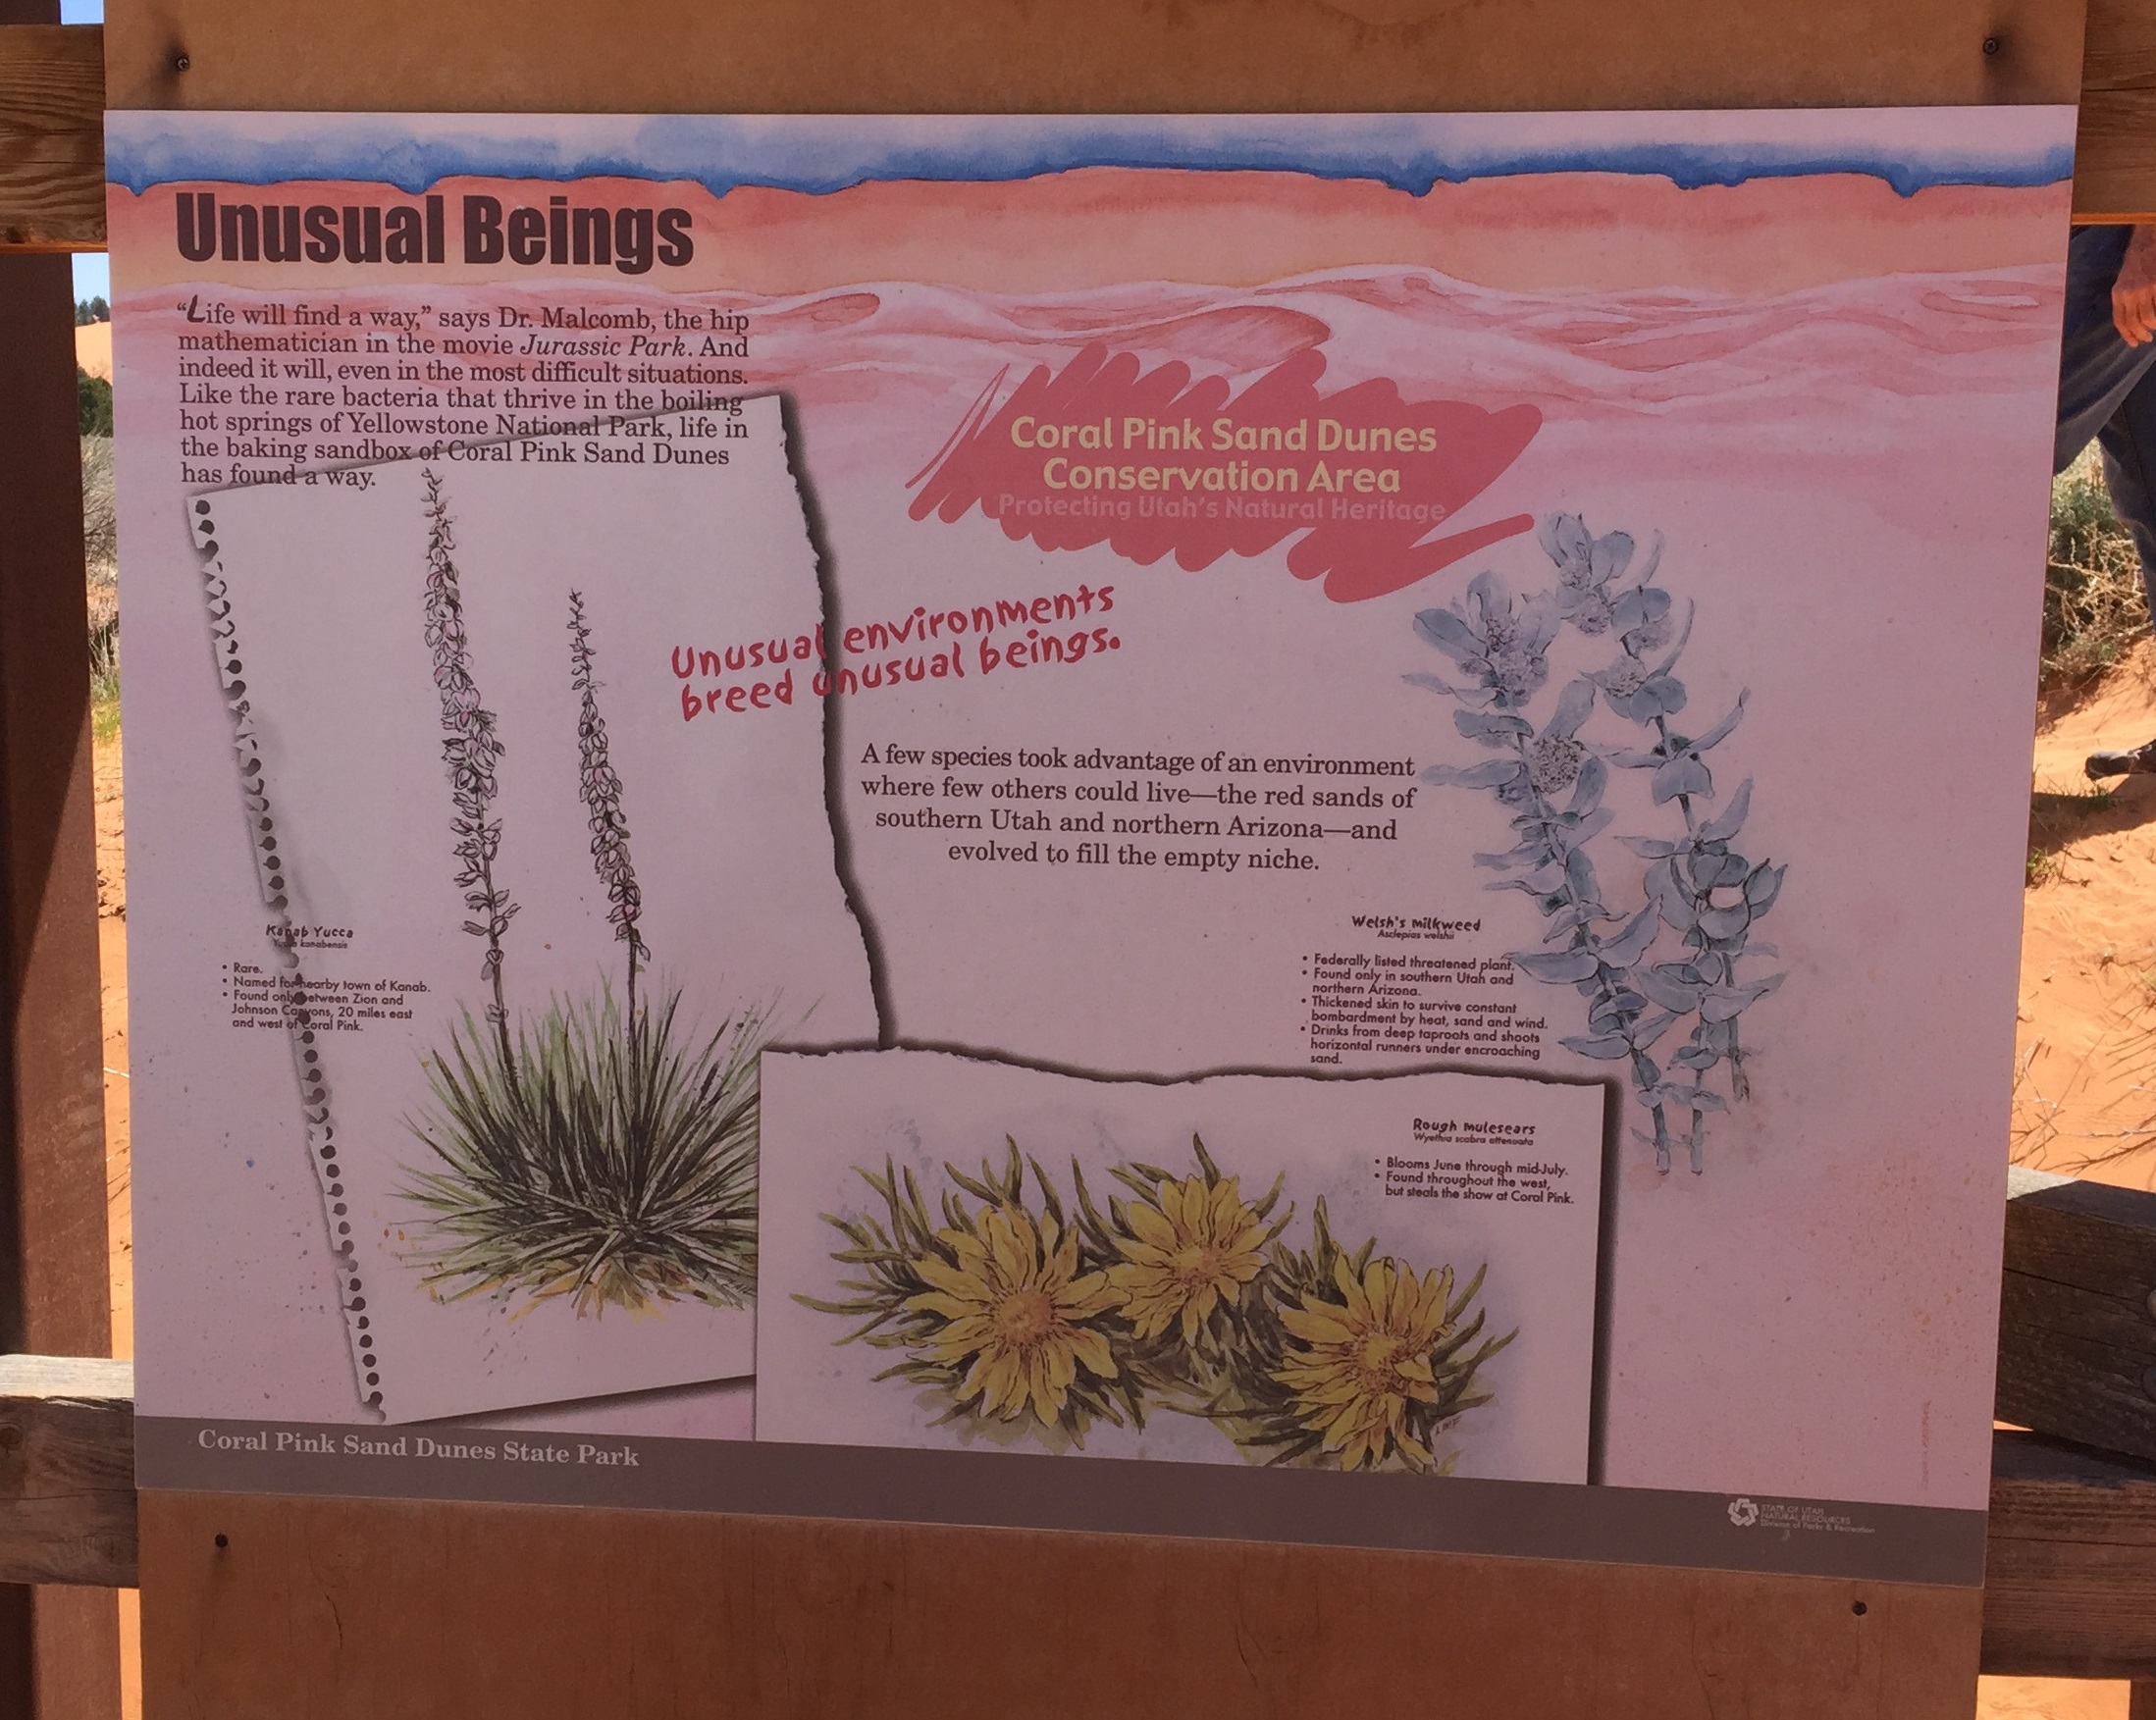 Interpretive sign at the Coral Pink Sand Dunes State Park